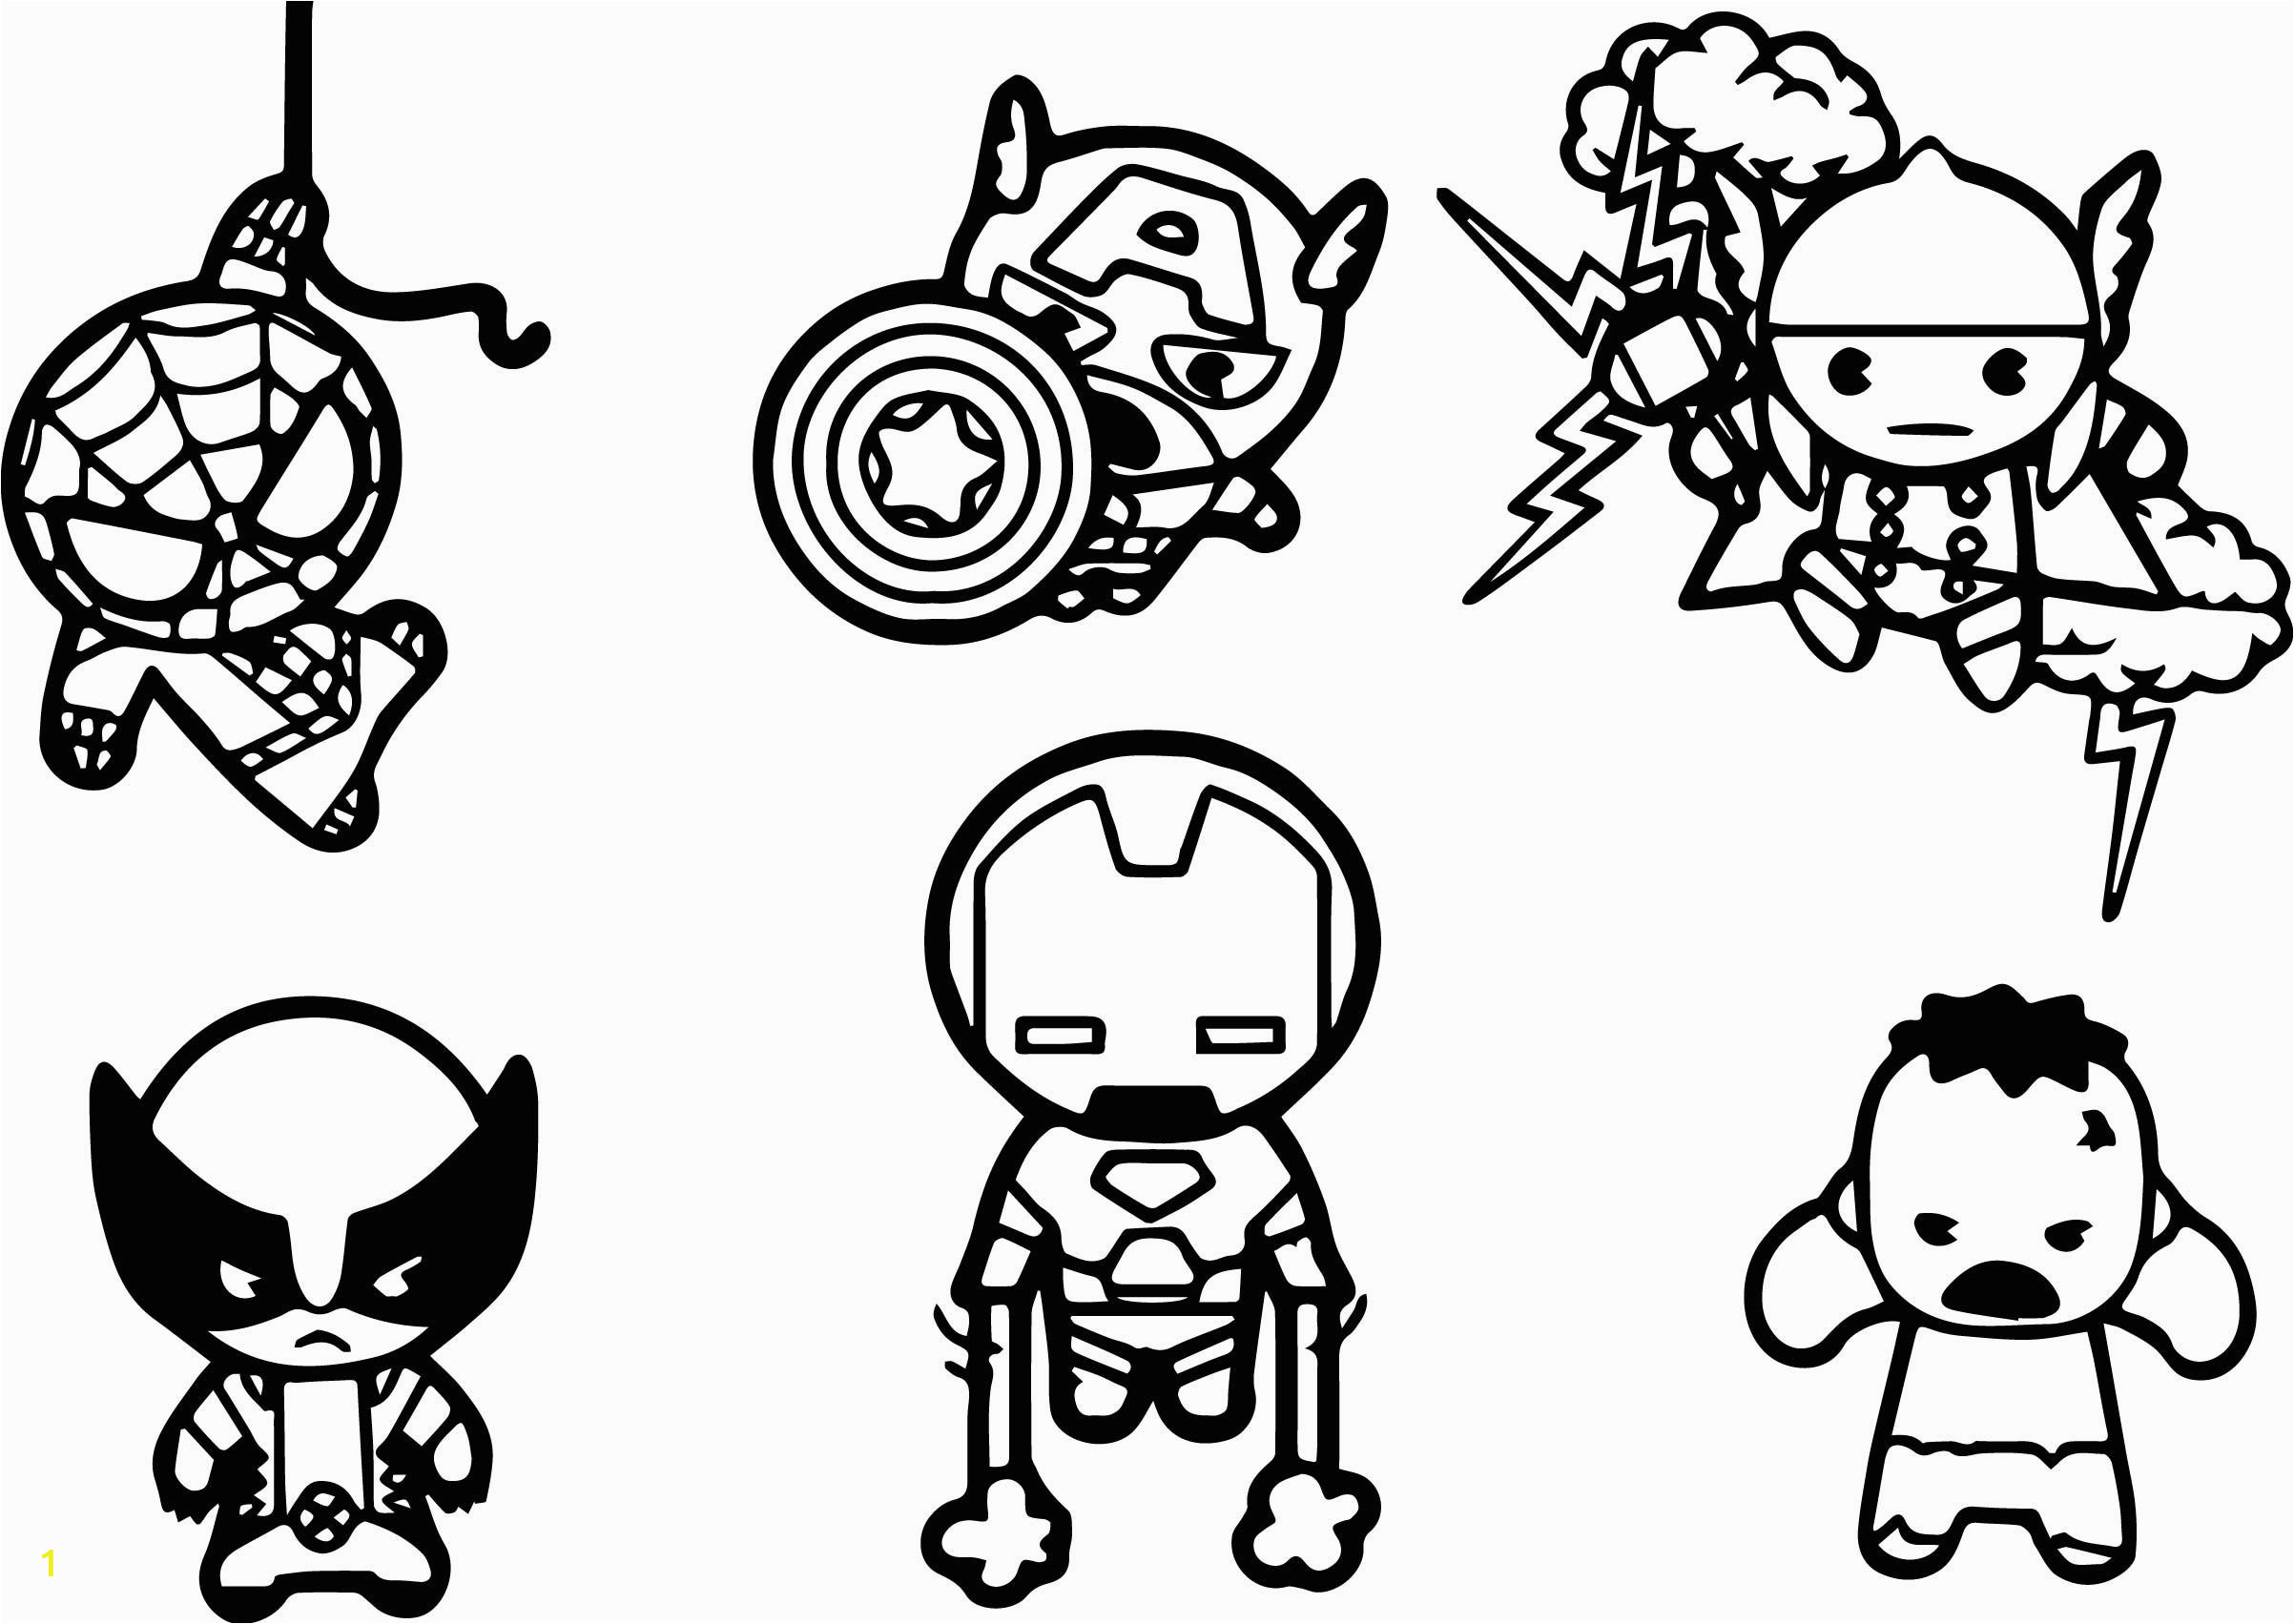 Avengers Symbol Coloring Page Avengers Baby Chibi Characters Coloring Page